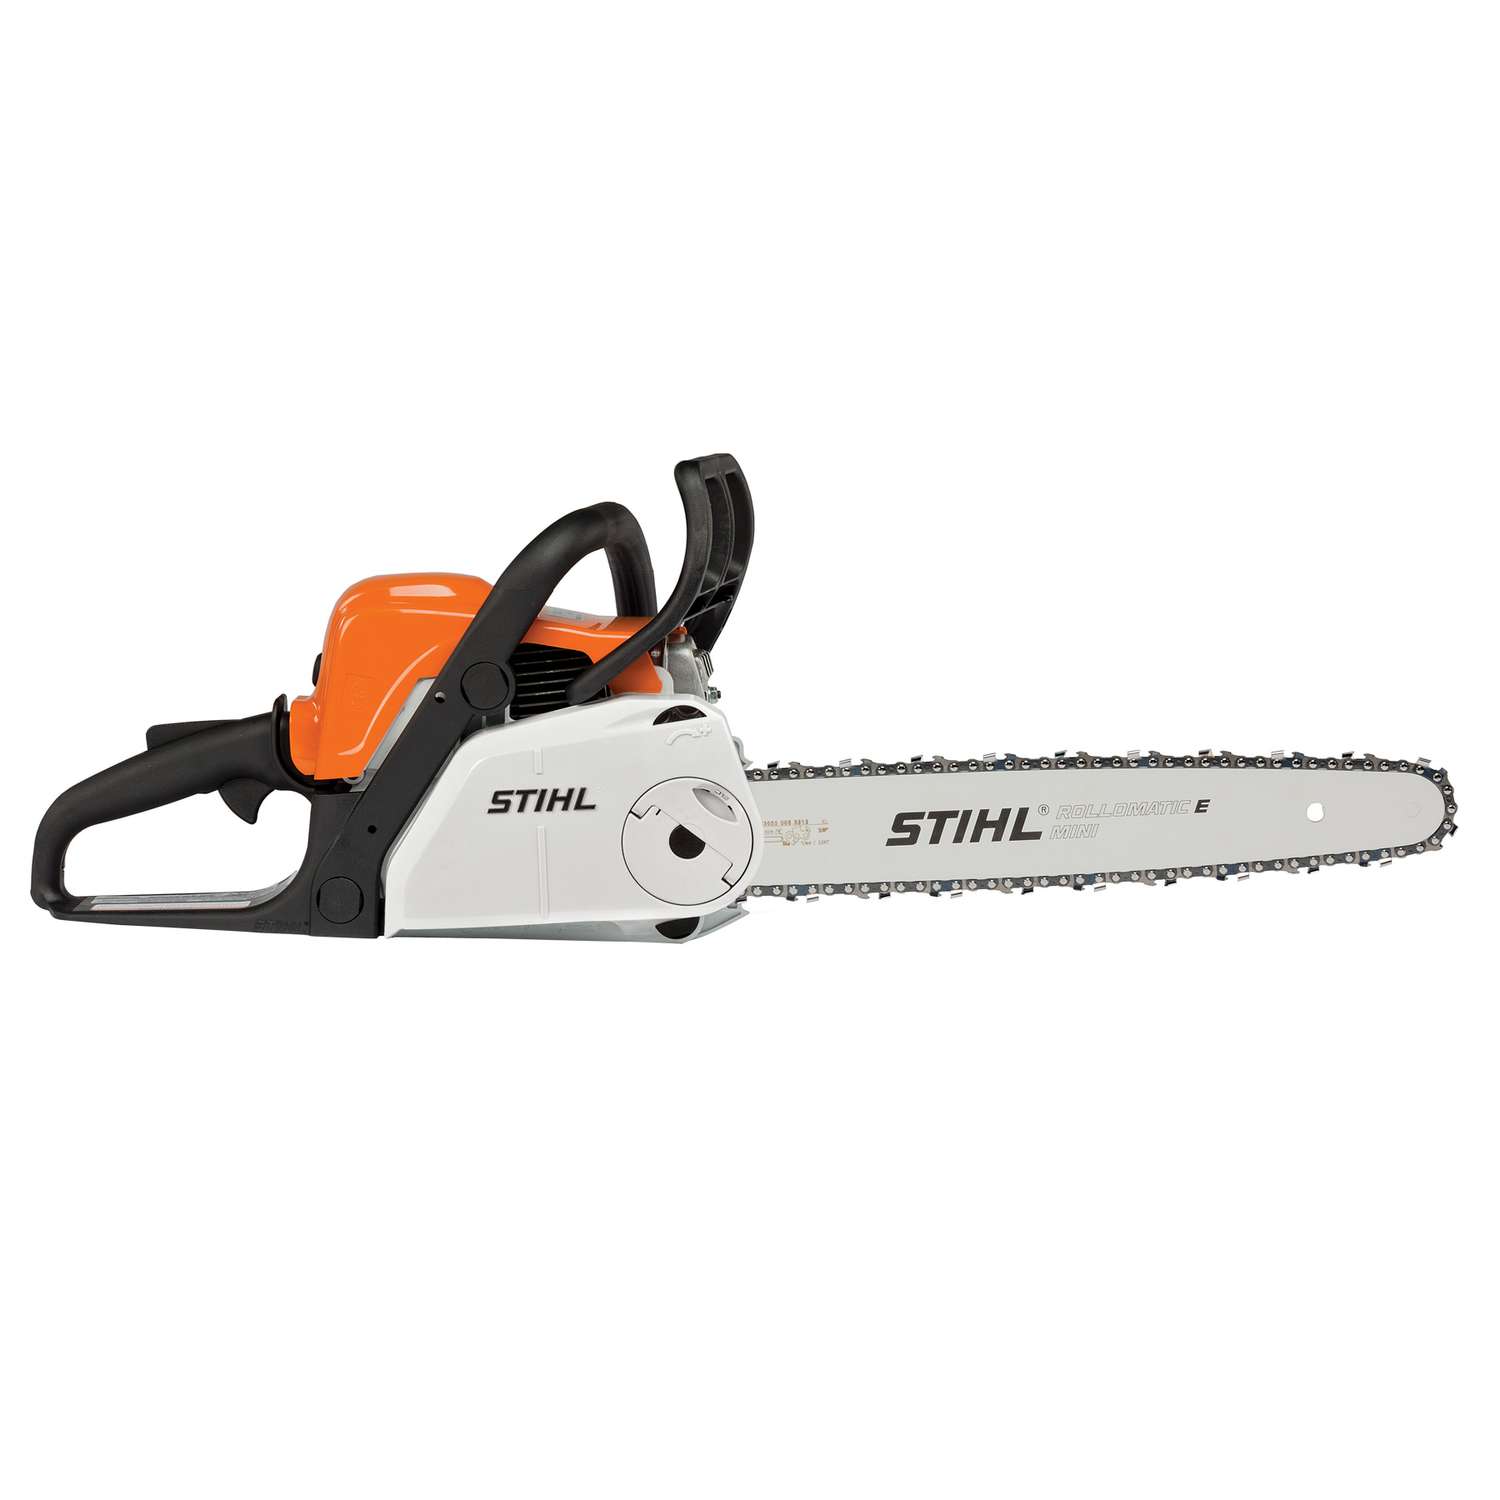 Stihl Ms 180 C Be 16 In 31 8 Cc Gas Chainsaw Ace Hardware